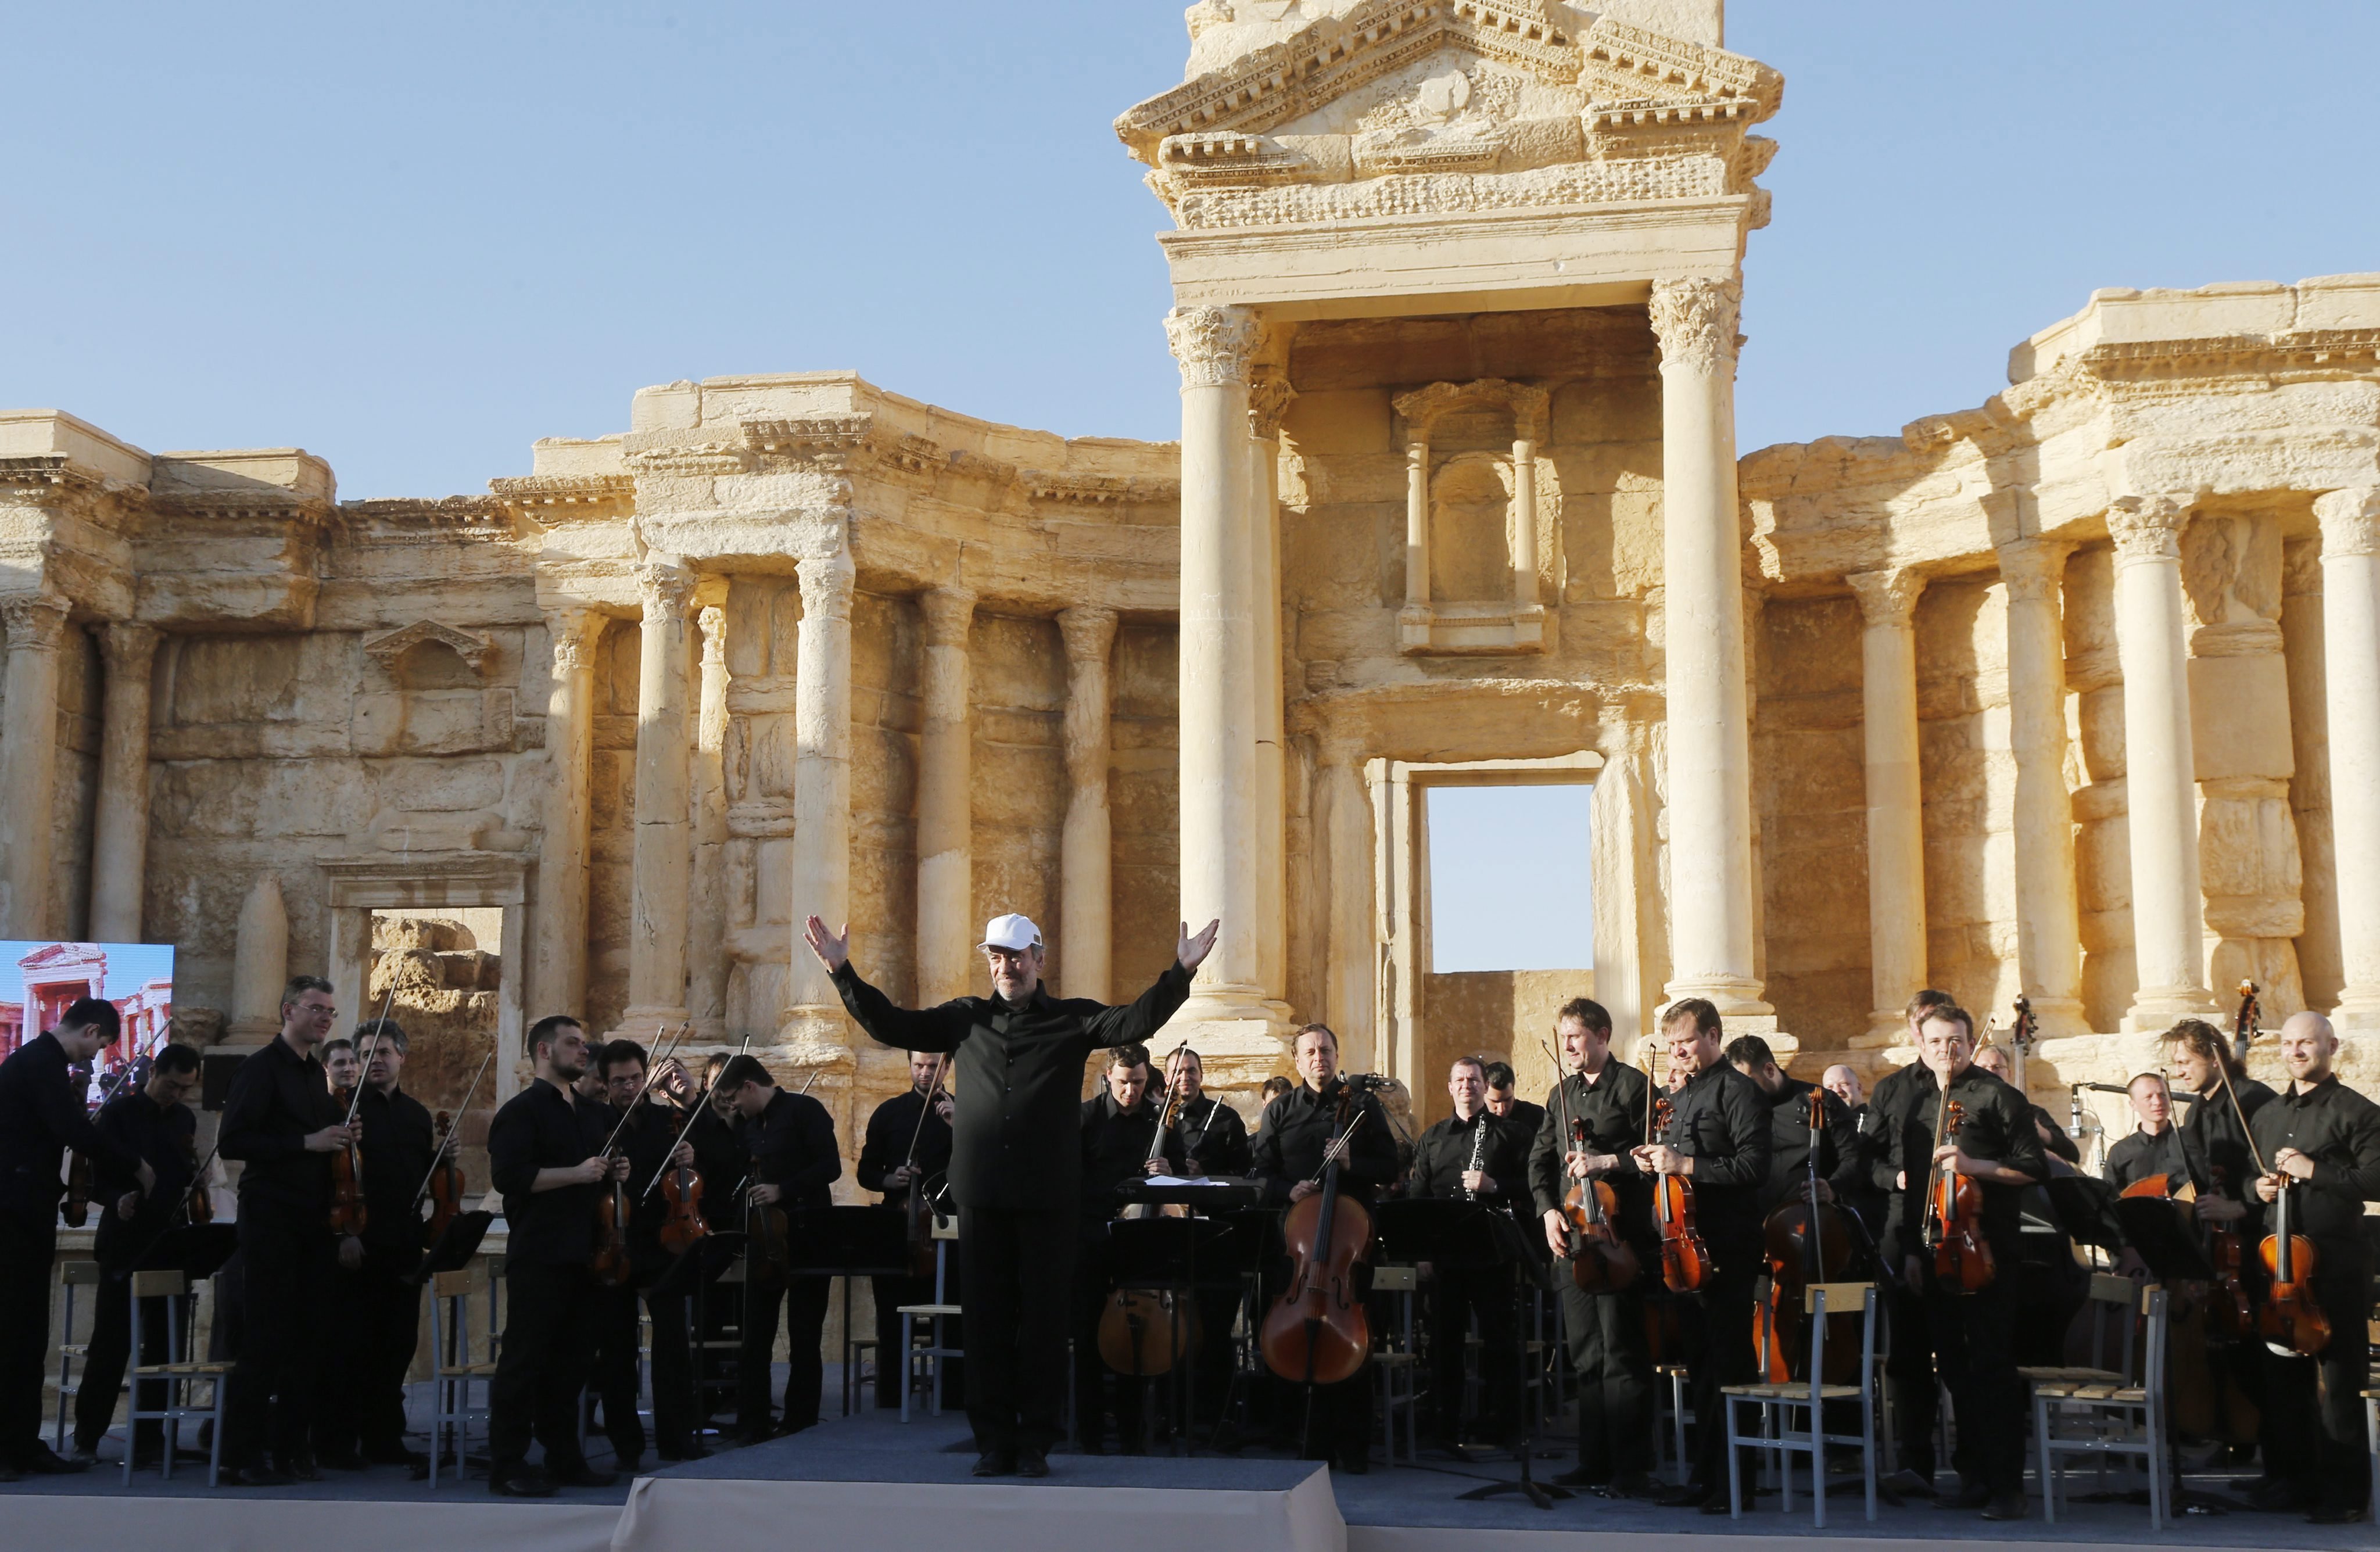 Chief conductor of the Mariinsky Theater Orchestra Valery Gergiev greets the public after a concert in in the Palmyra amphitheater in Syria, on May 5, 2016. (Sergei Chirikov—EPA)